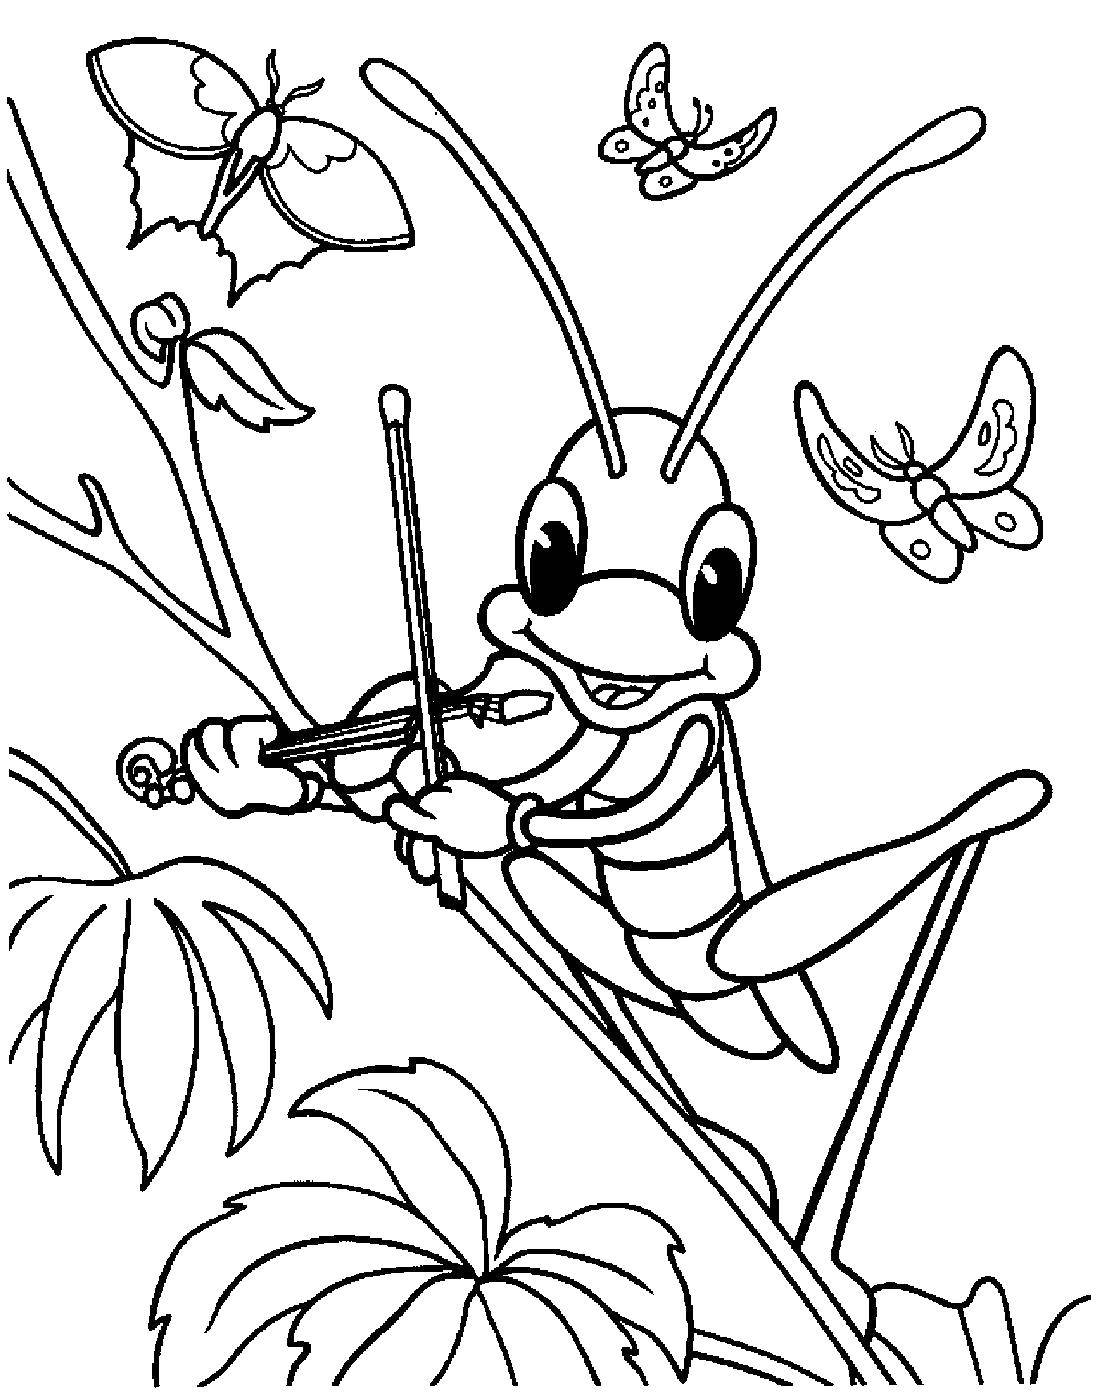 Coloring Grasshopper playing the violin. Category grasshopper . Tags:  grasshopper .